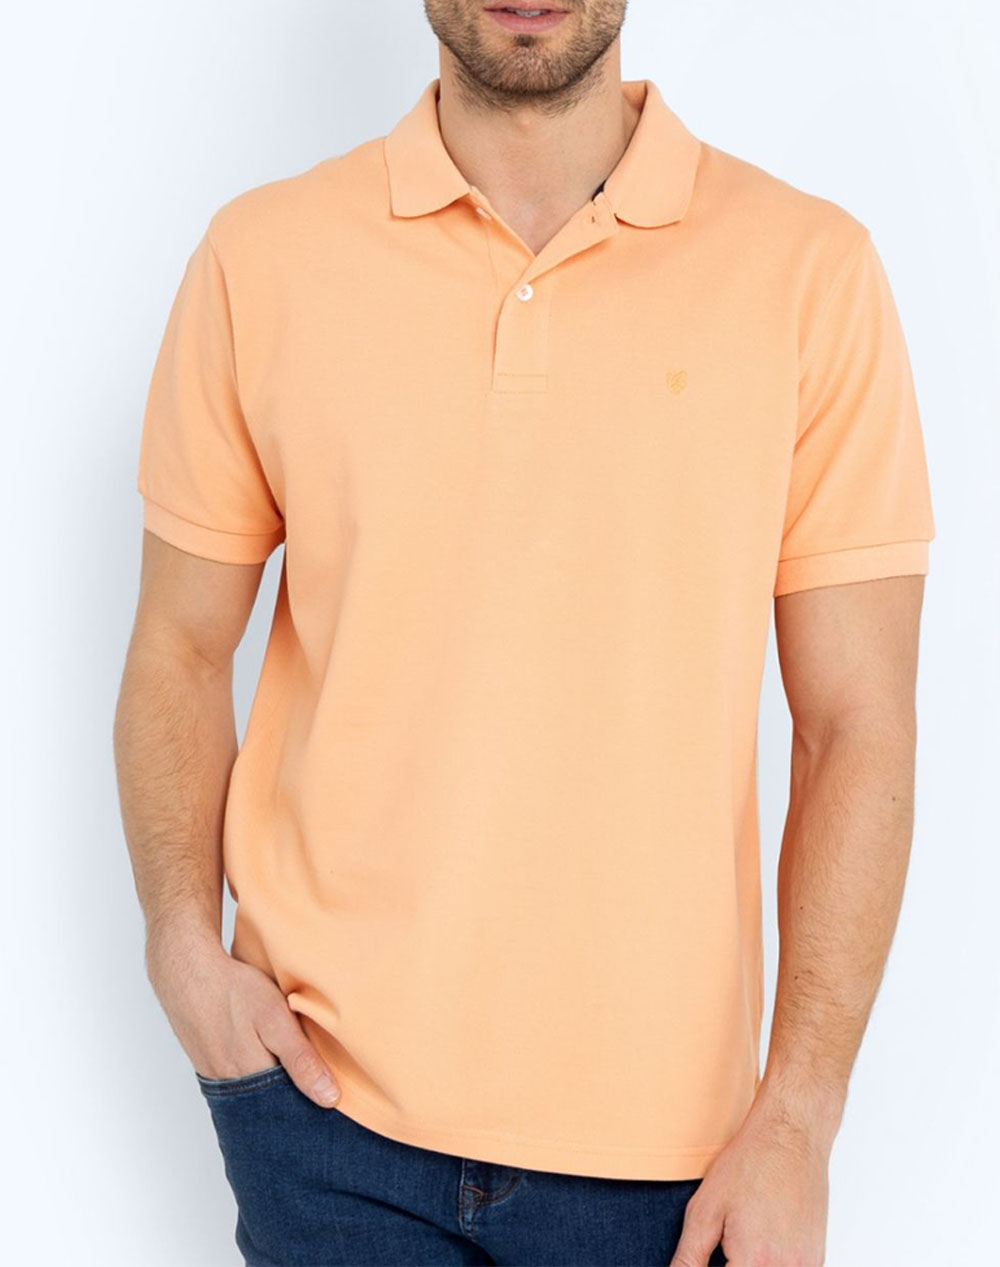 THE BOSTONIANS ΜΠΛΟΥΖΑ POLO PIQUE REGULAR FIT 3PS0001-SALMON Coral